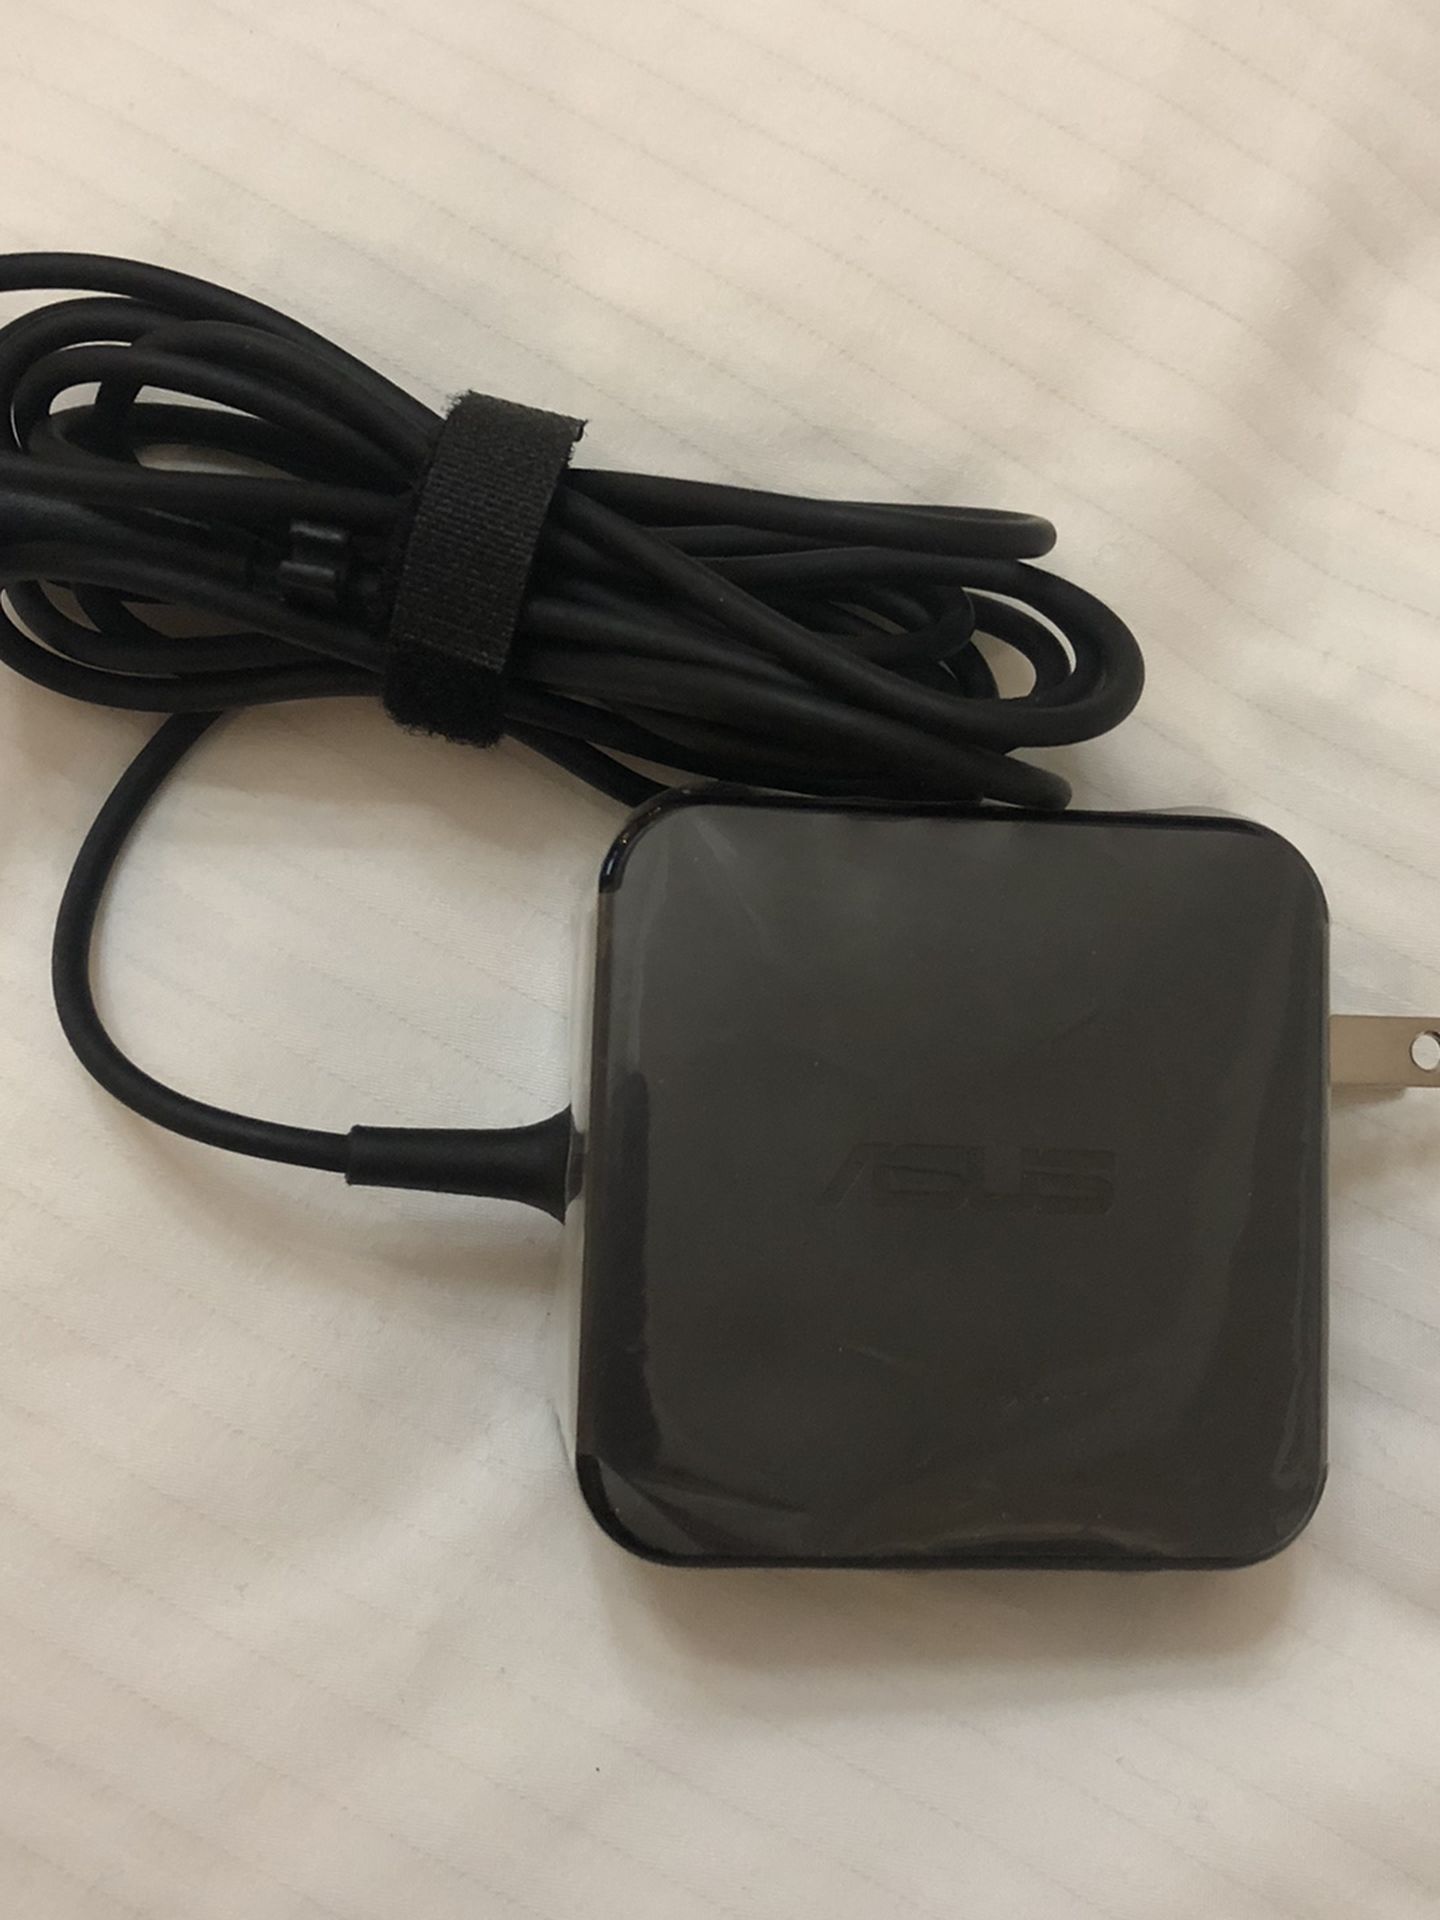 Genuine Original Asus Laptop Charger AC Adapter Power Supply AD883J20 19V 45W